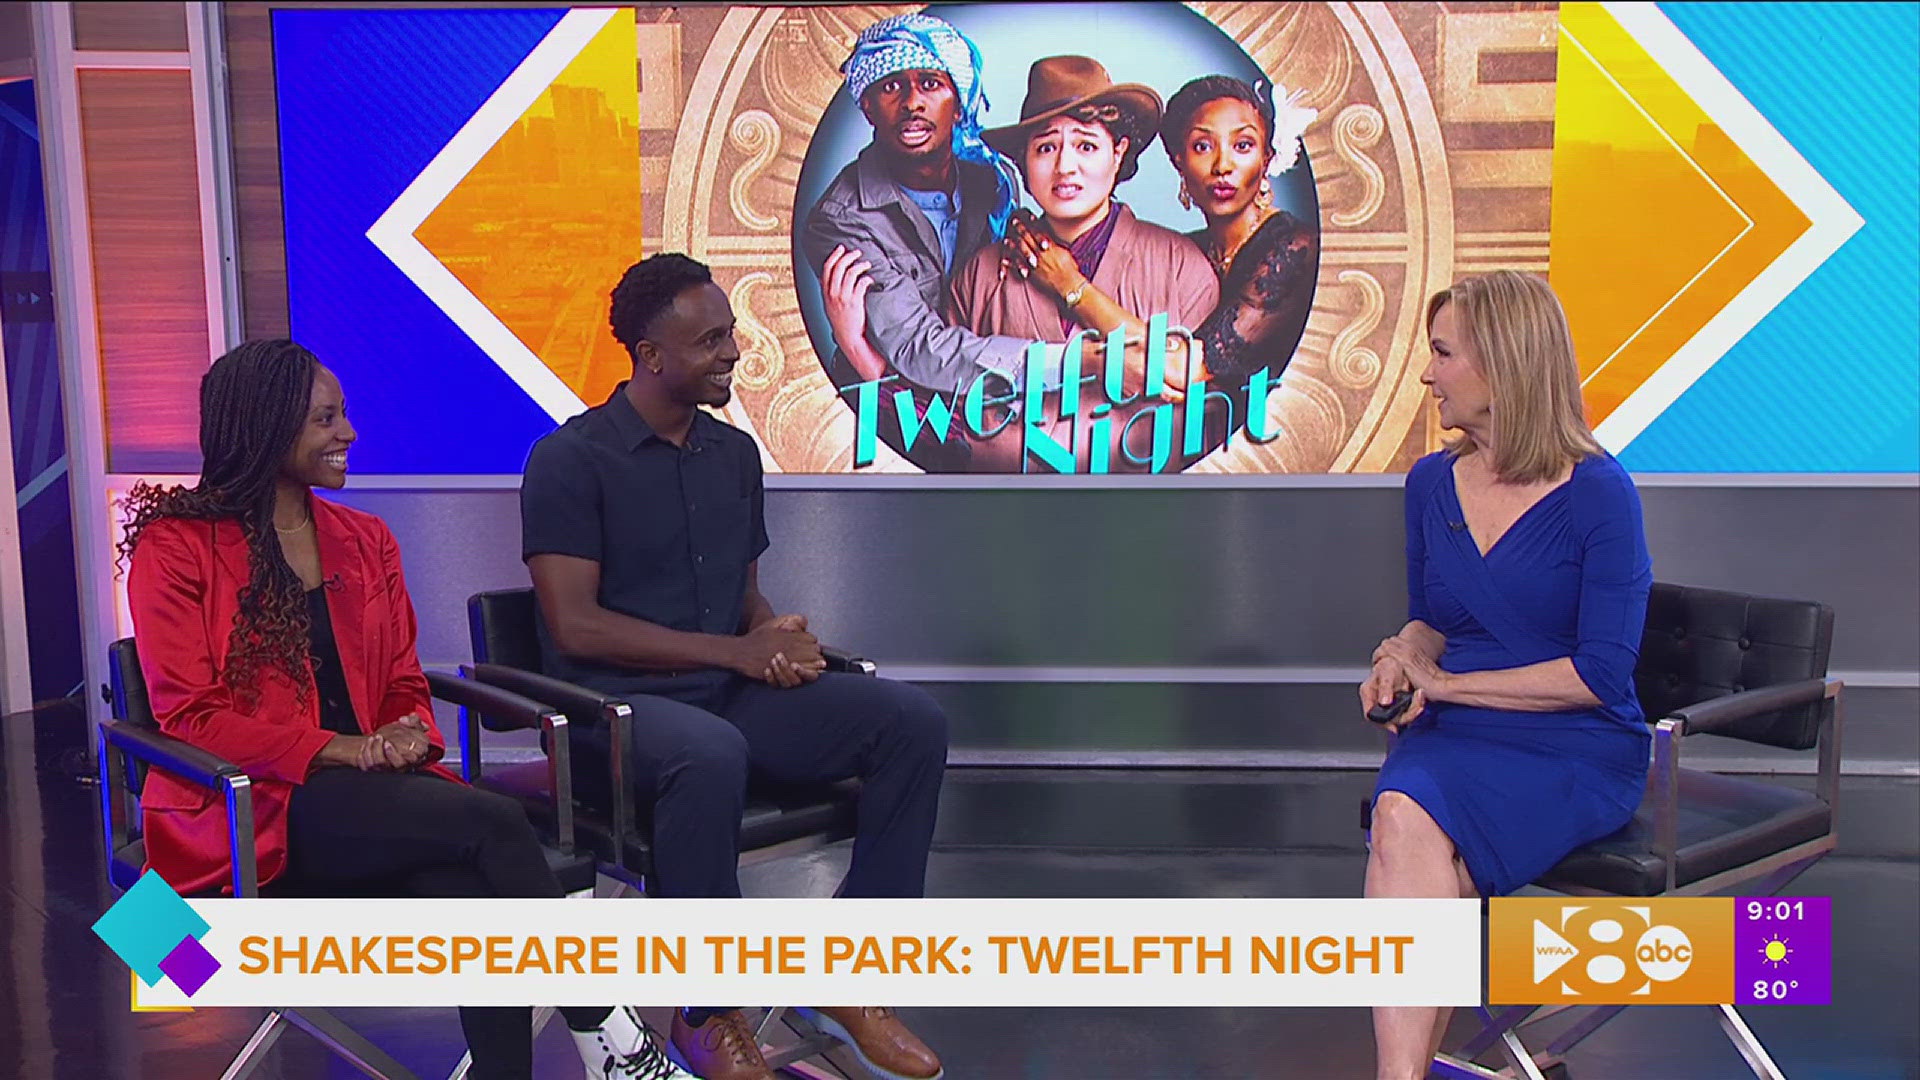 Shakespeare in the Park "Twelfth Night" starring Shakespeare Dallas' Caleb Mosley and Mikaela Baker runs June 21-July 21, Wednesday-Sunday.